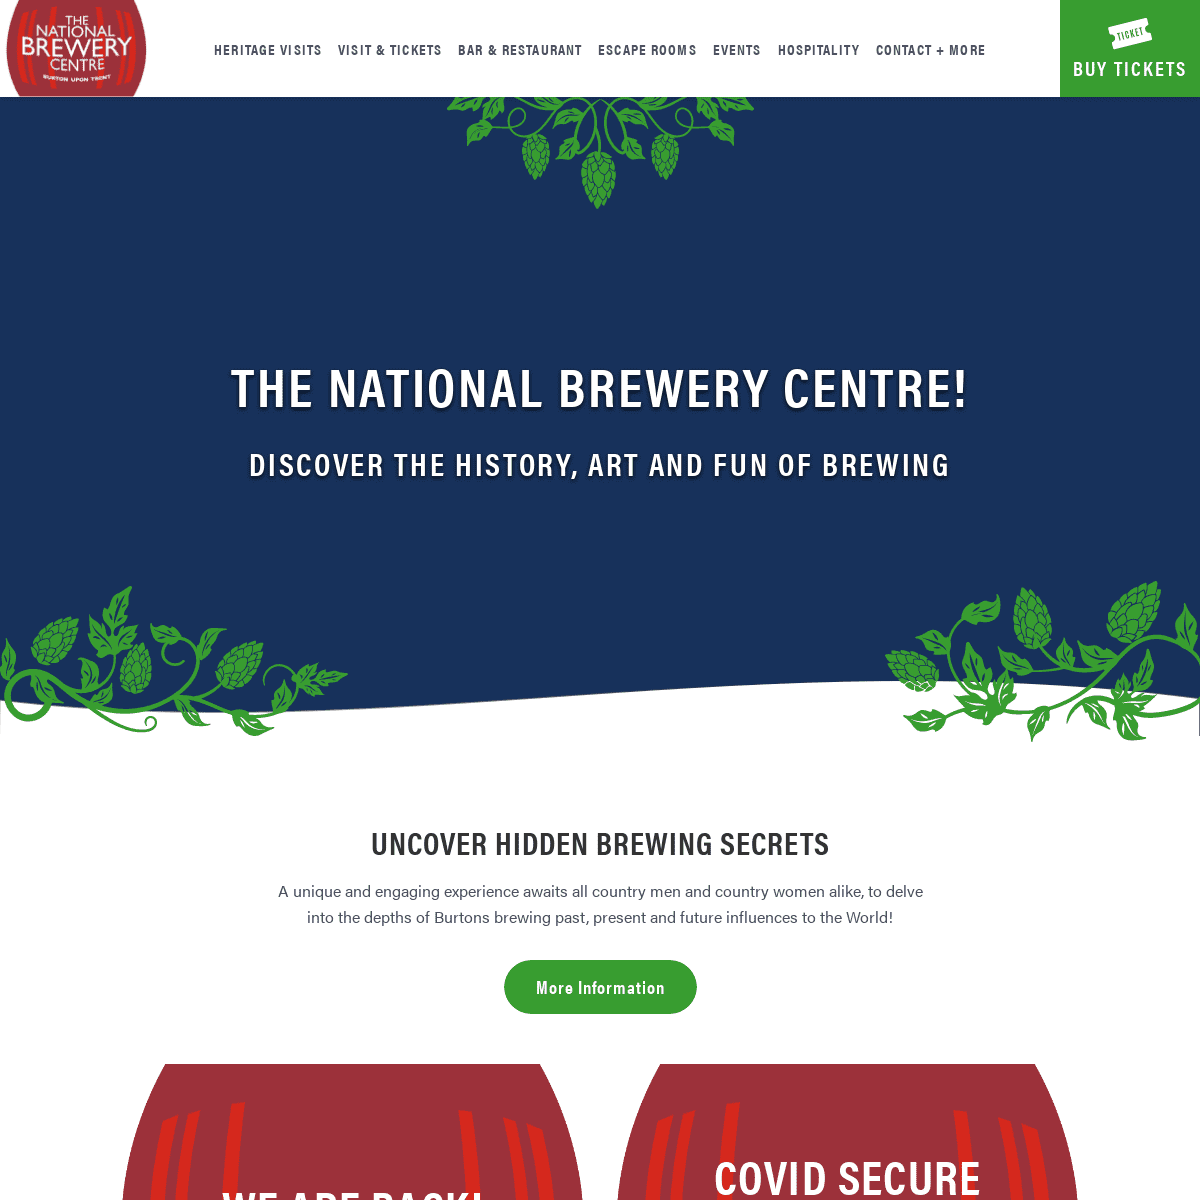 A complete backup of https://nationalbrewerycentre.co.uk